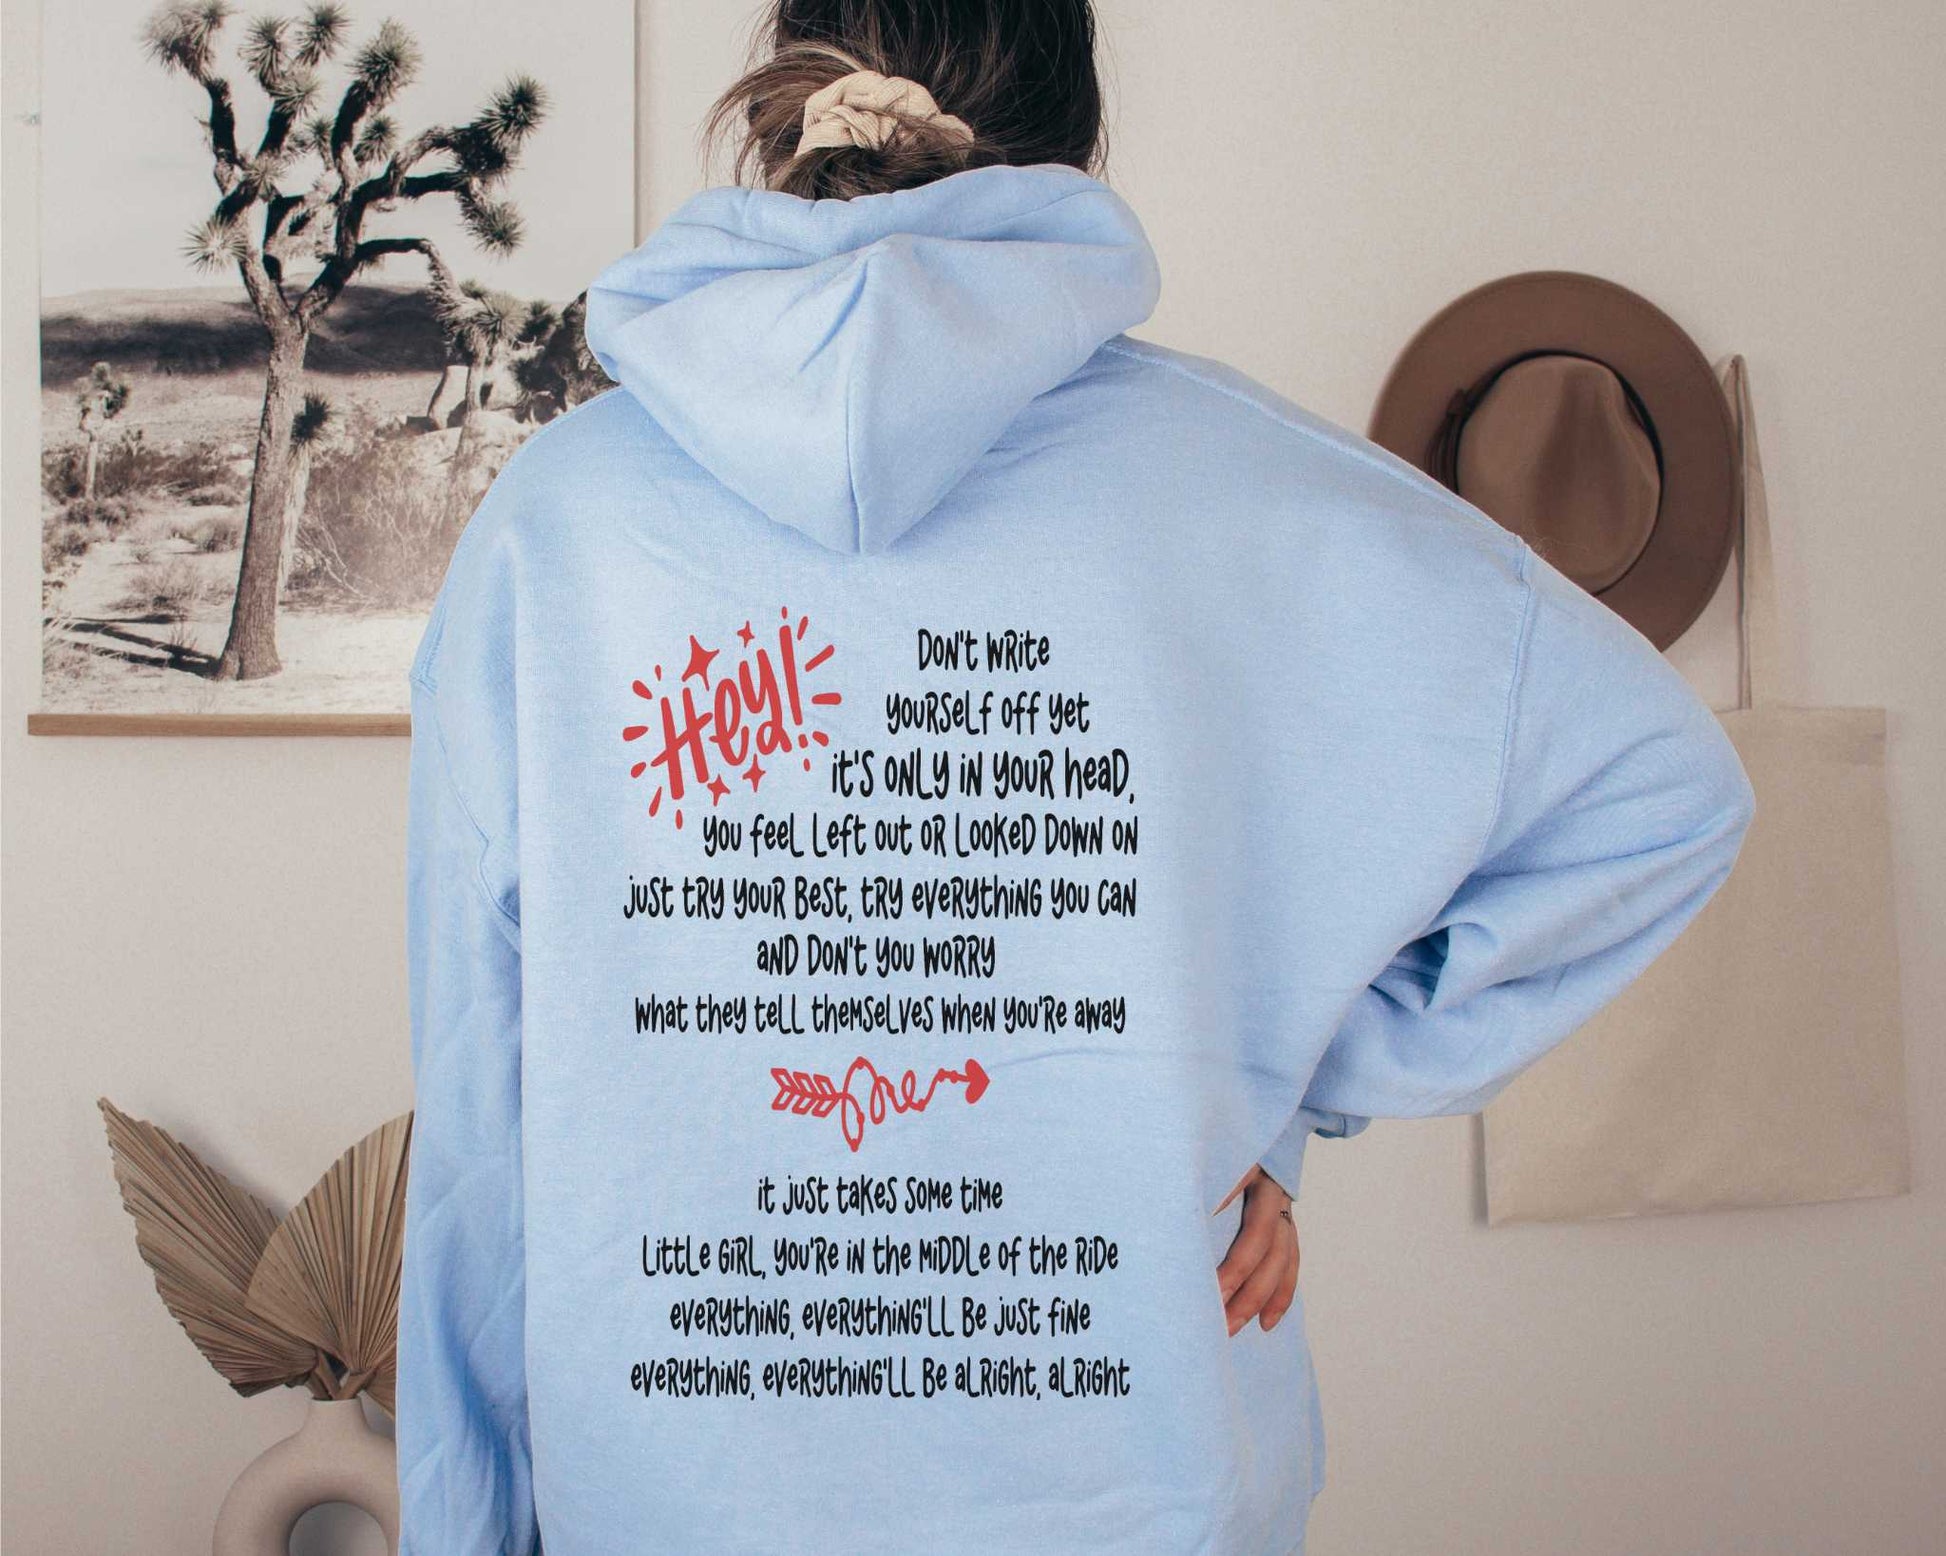 Jimmy Eat World "The Middle" Emo Kid Hoodie in Light Blue